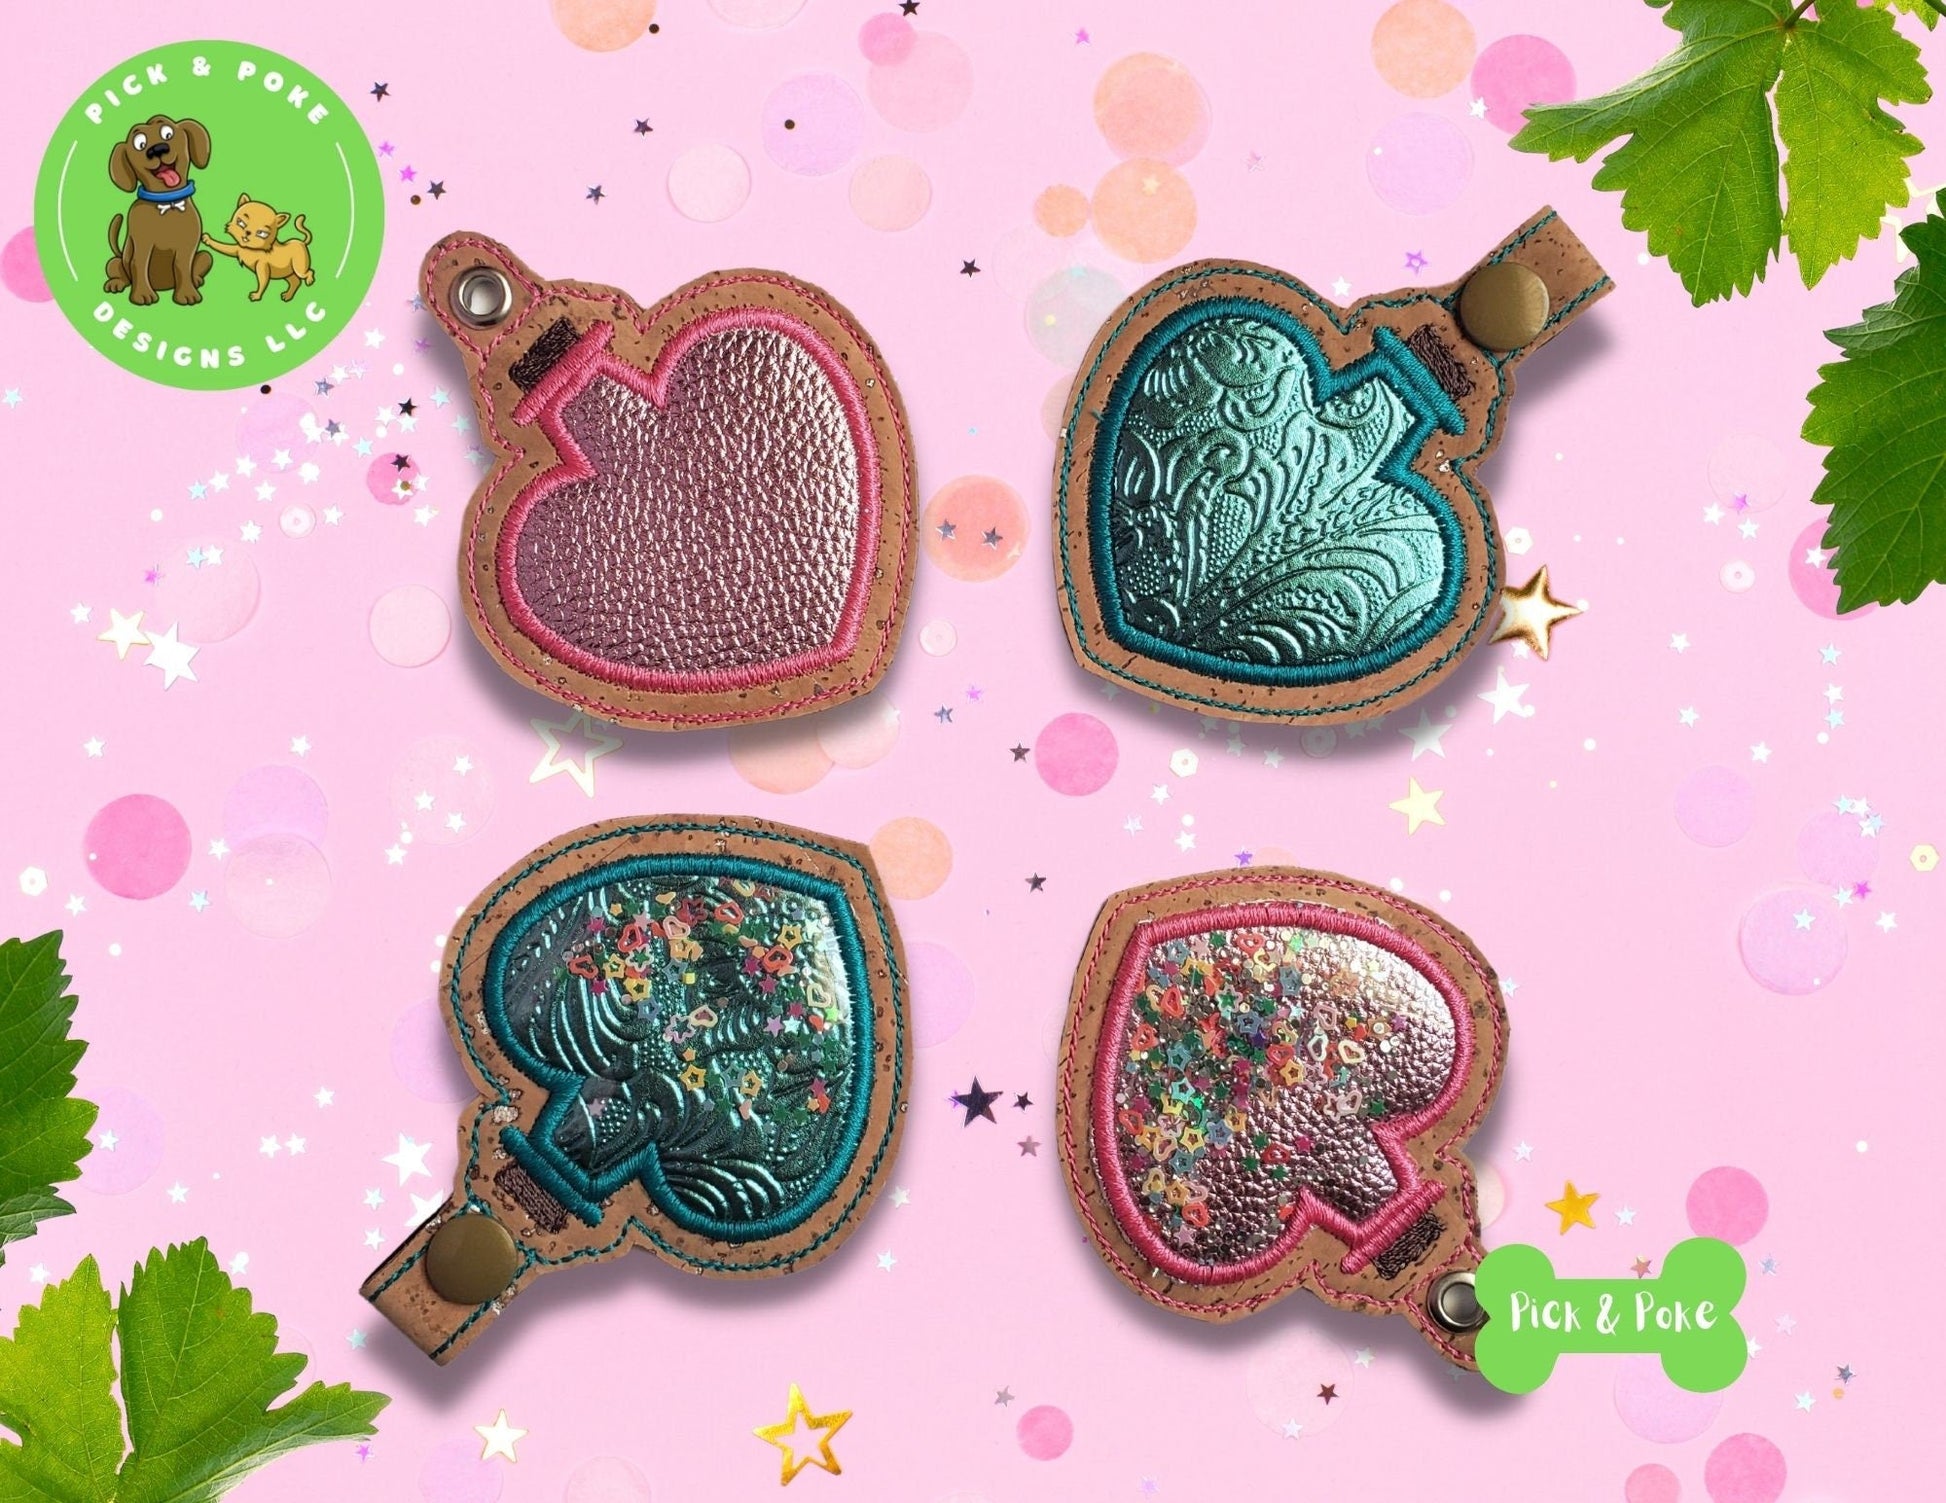 In the Hoop Embroidery Project / Applique Heart Potion Bottle Snap Tab and Eyelet Key Fob / Gift Tag / Digital File / Instant DOWNLOAD / SetPick and Poke Designs